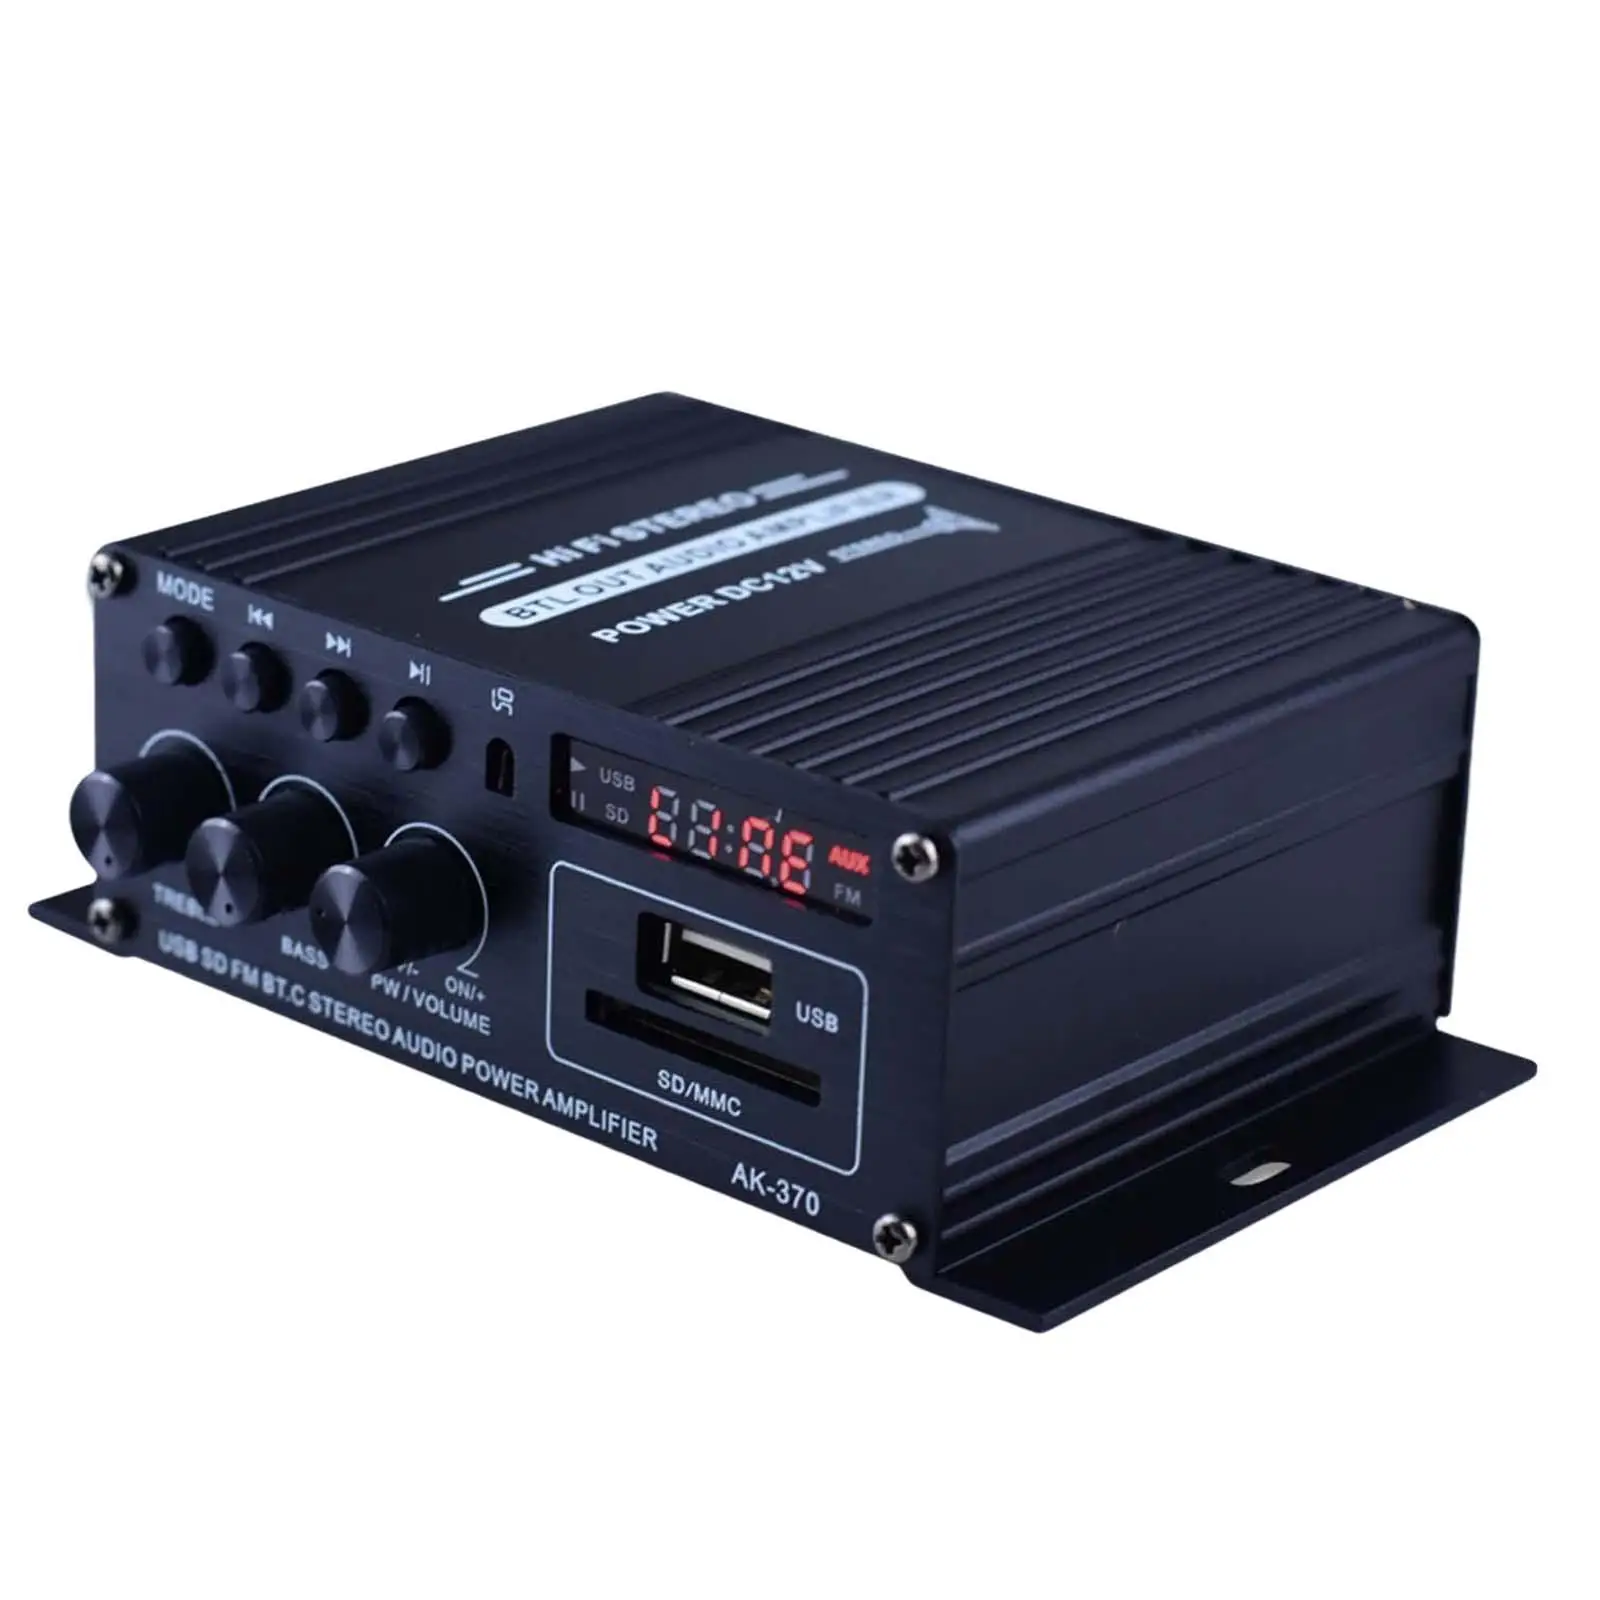 Bluetooth Amplifier 12V-24V 2.0 CH with Remote Control for Store Home Theater Audio Power Amplifier Mini HiFi Stereo Amp Speaker